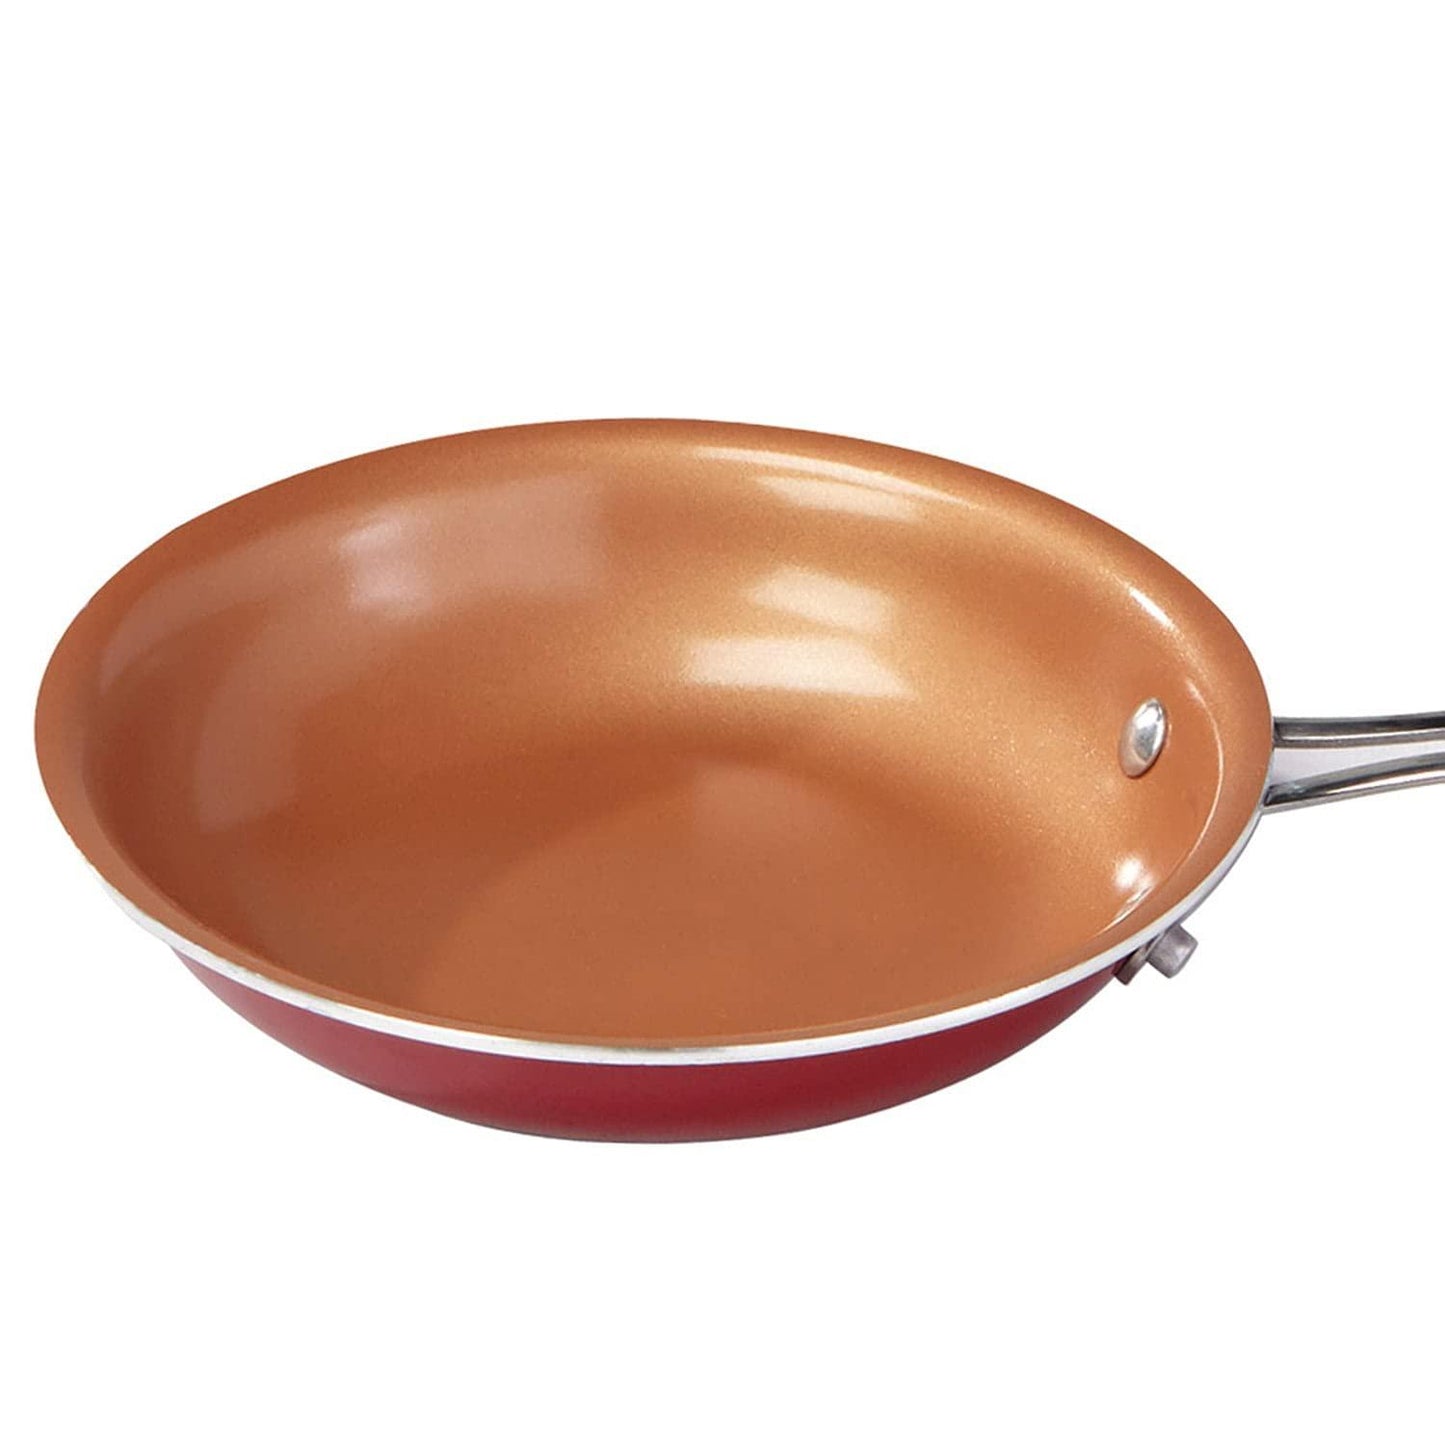 Red Copper 10 inch Pan by BulbHead Ceramic Copper Infused Non-Stick Fry Pan Skillet Scratch Resistant Without PFOA and PTFE Heat Resistant From Stove To Oven Up To 500 Degrees - CookCave